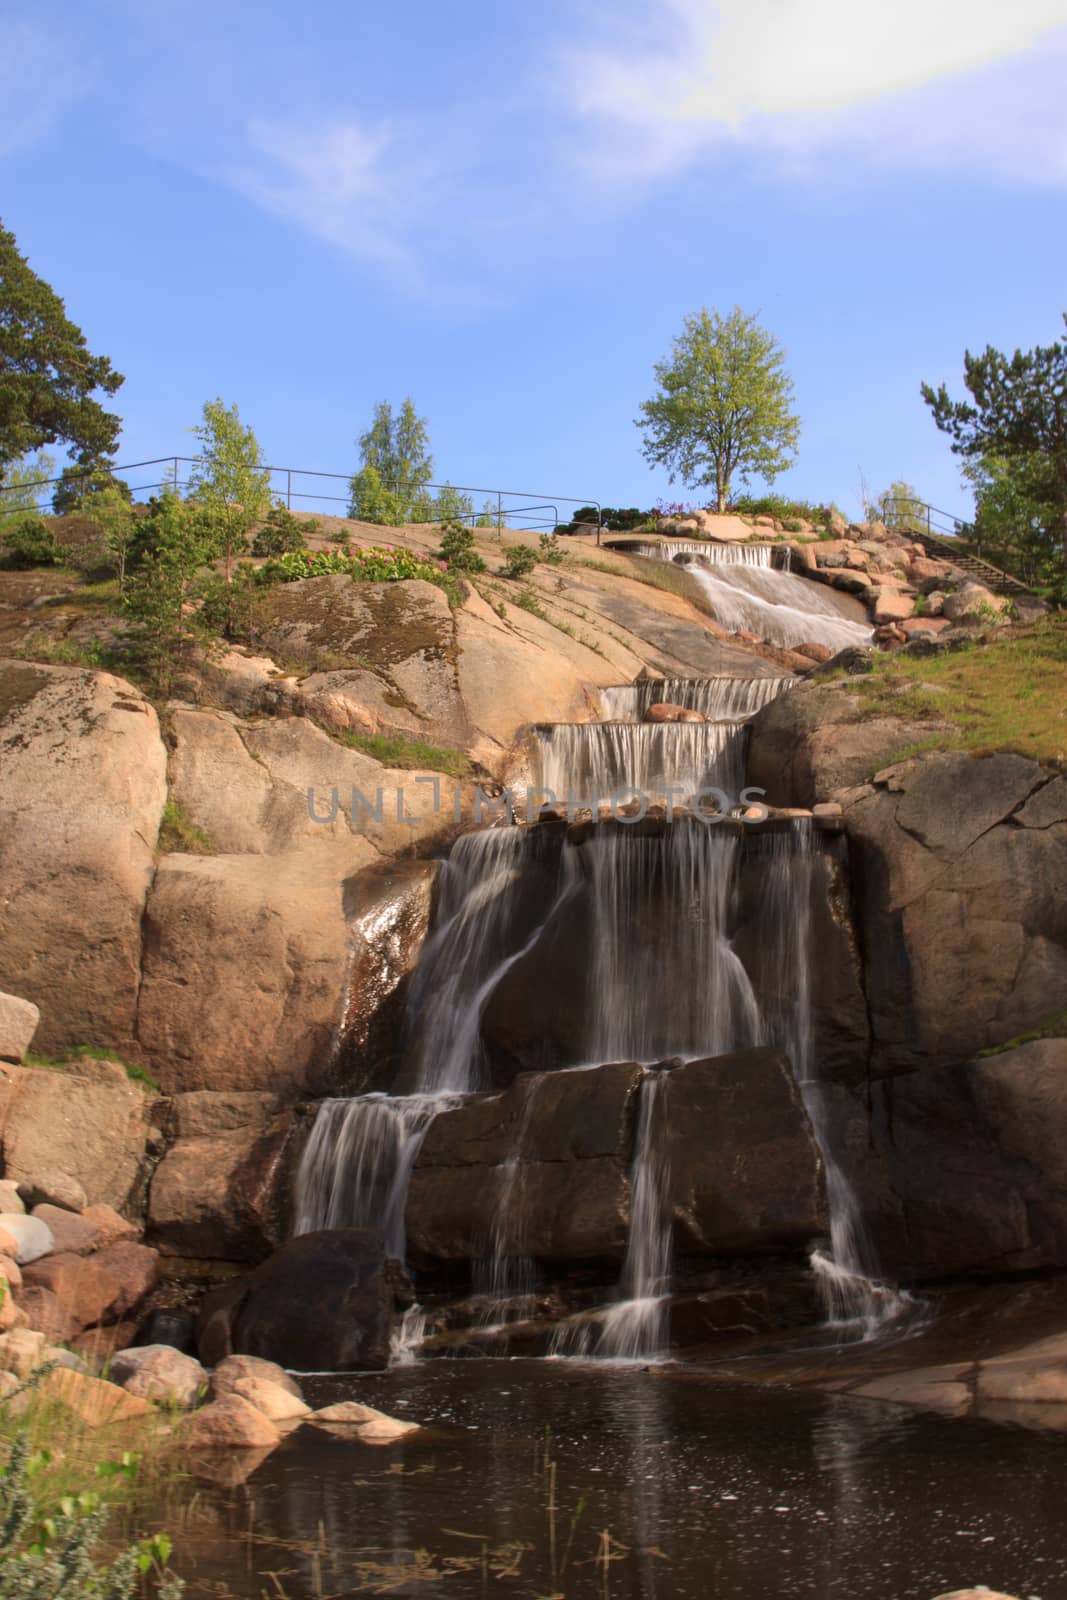 Little waterfall in Kotka, Finland. Beautiful warm day and blue sky.